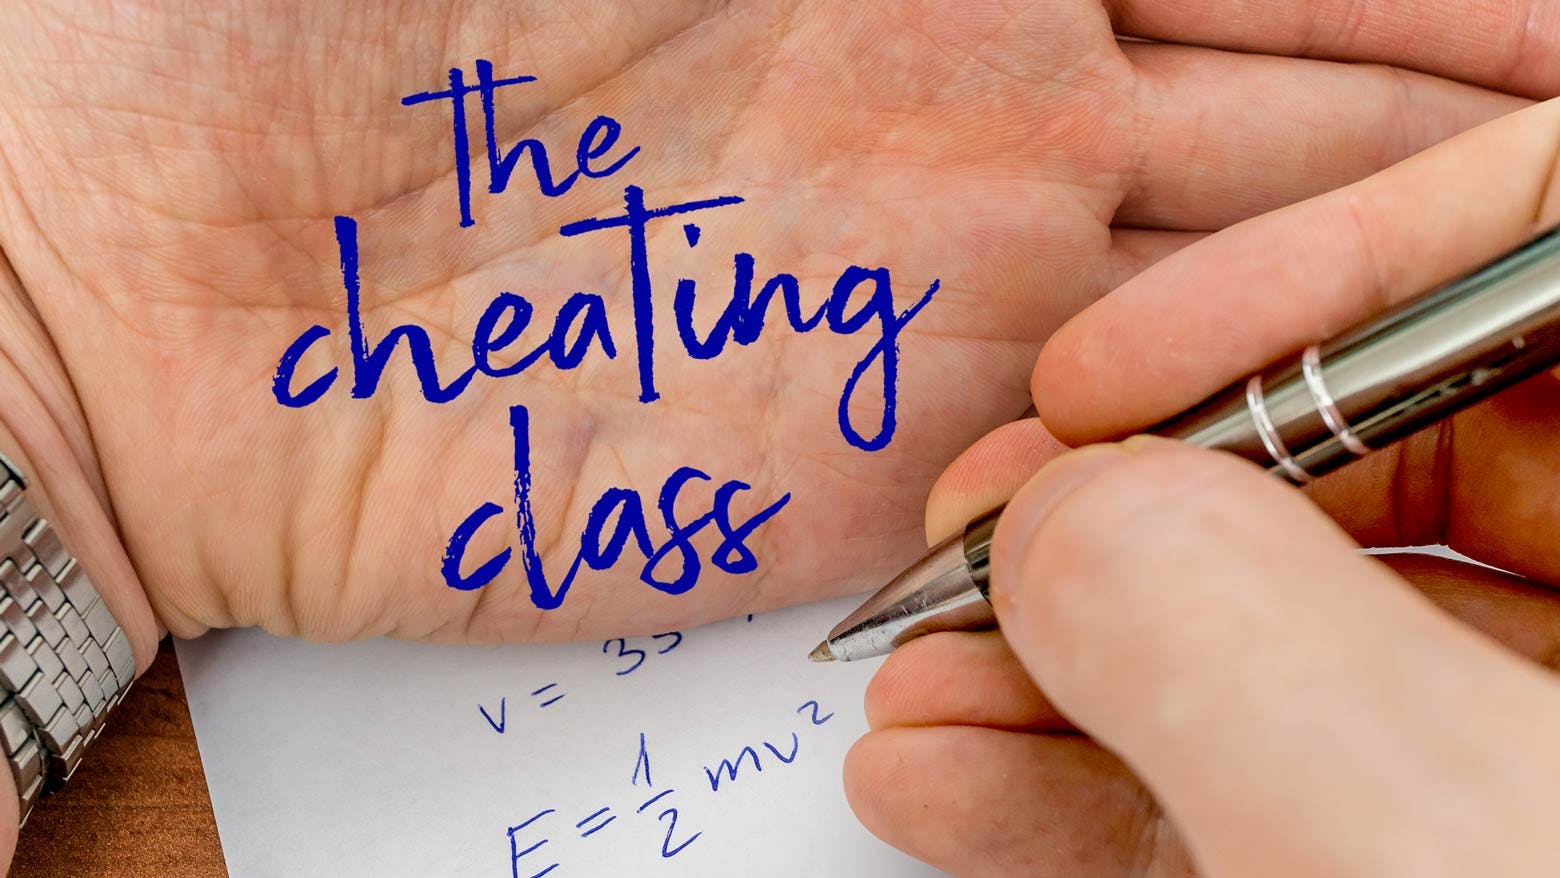 The Cheating Class